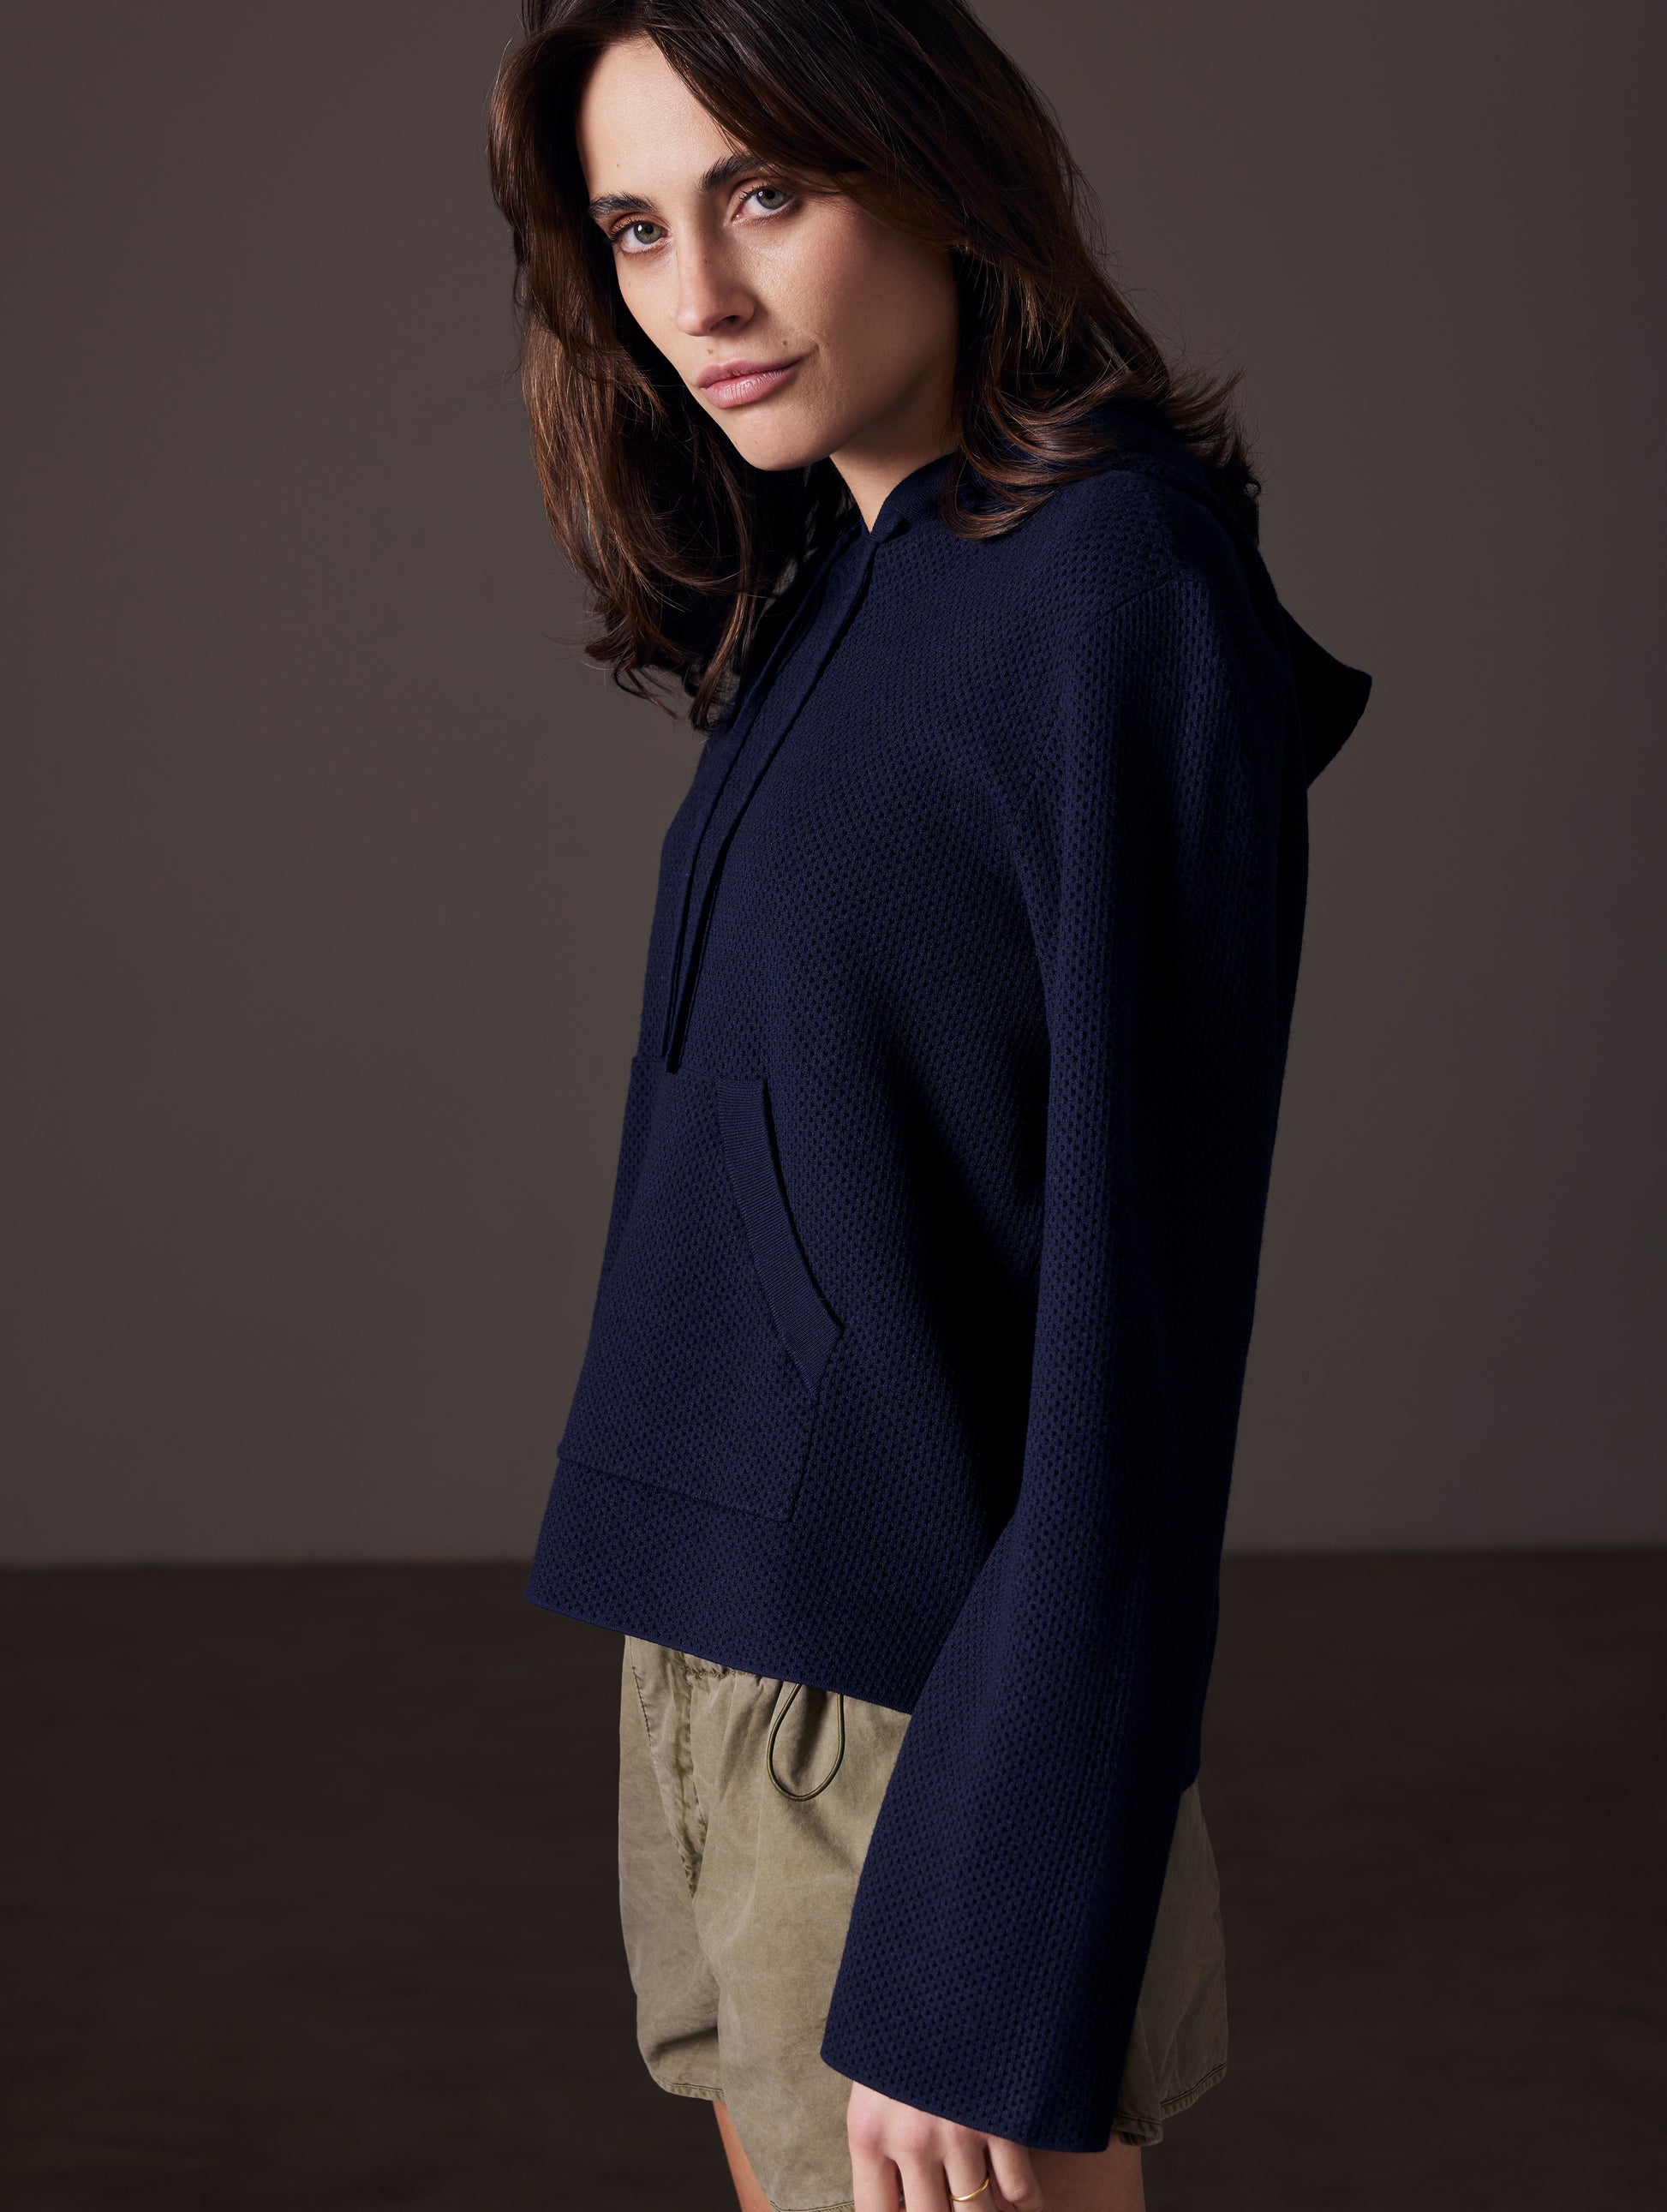 woman wearing blue sweater from AETHER Apparel